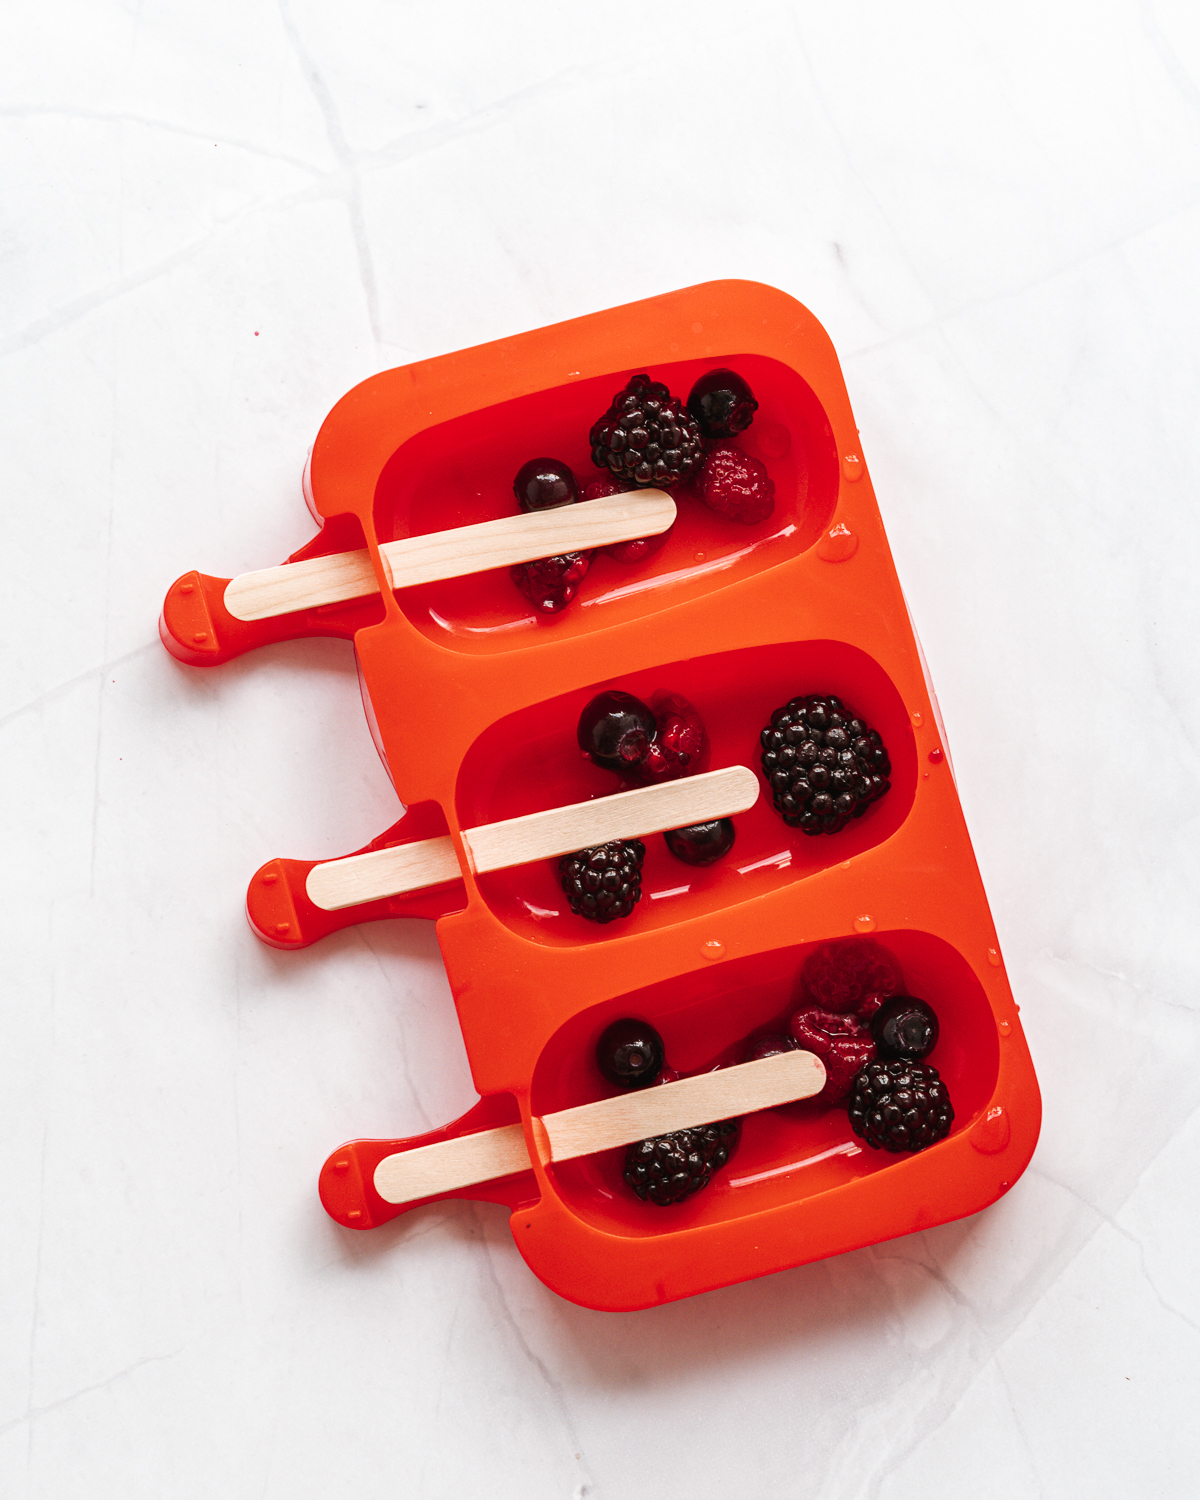 red popsicle mold with berries